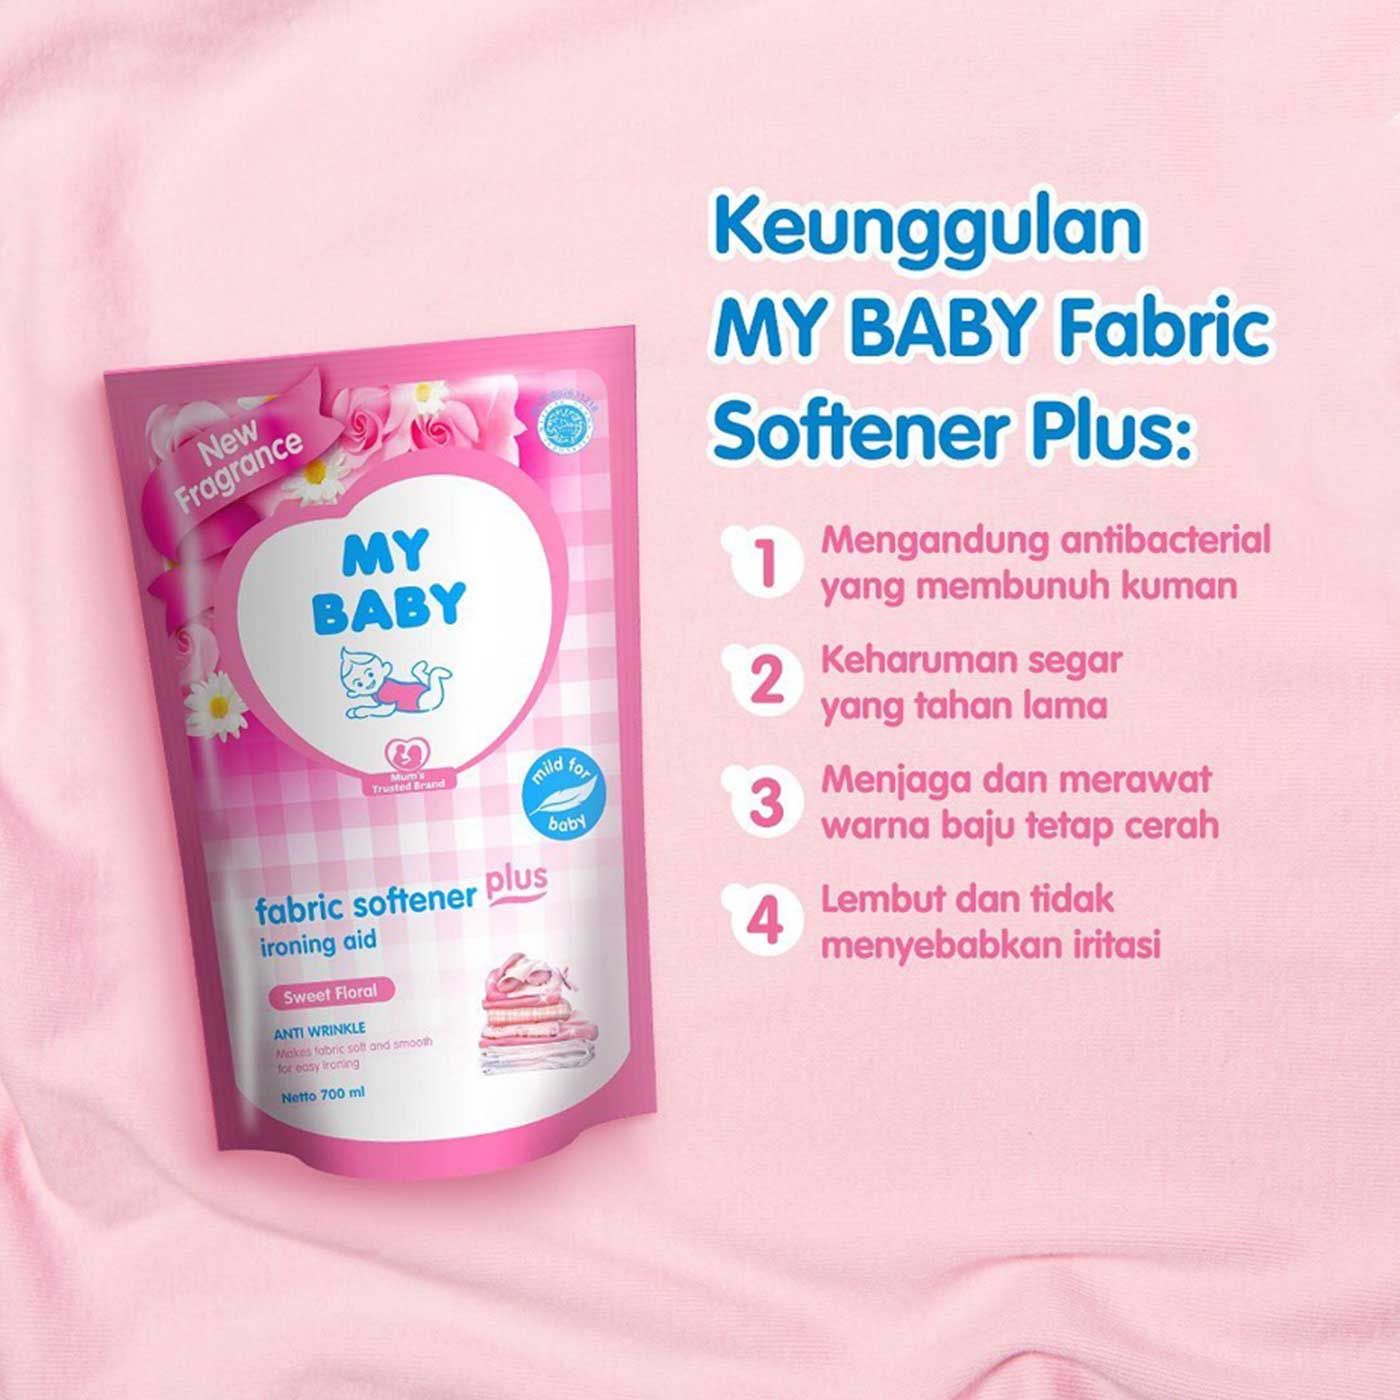 My Baby fabric Softener Plus Ironing Aid Sweet Floral 700ml - 4